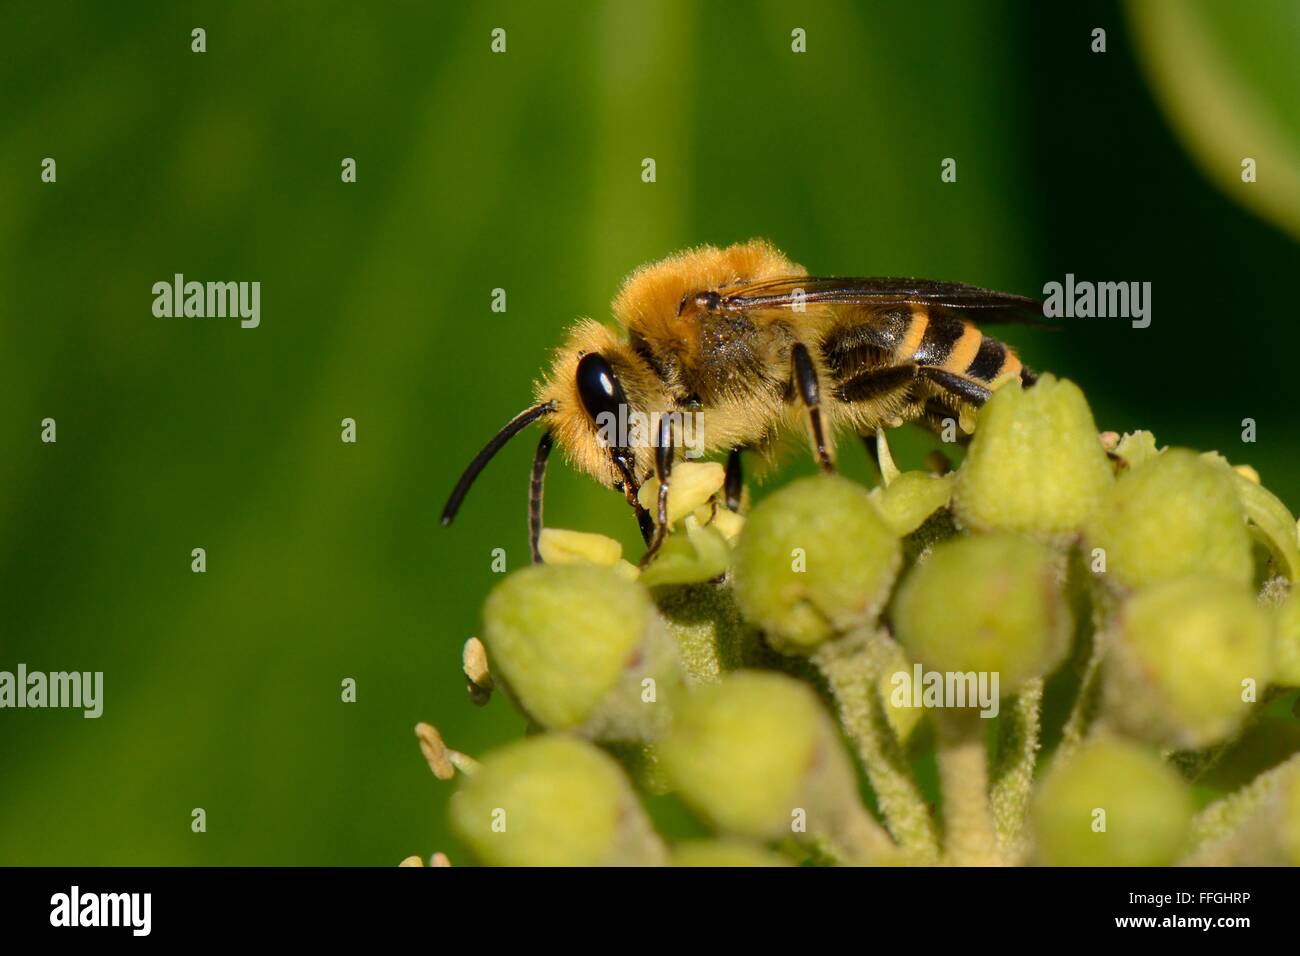 Ivy bee (Colletes hederae) visiting Ivy flowers (Hedera helix), Wiltshire garden, UK, September. Stock Photo